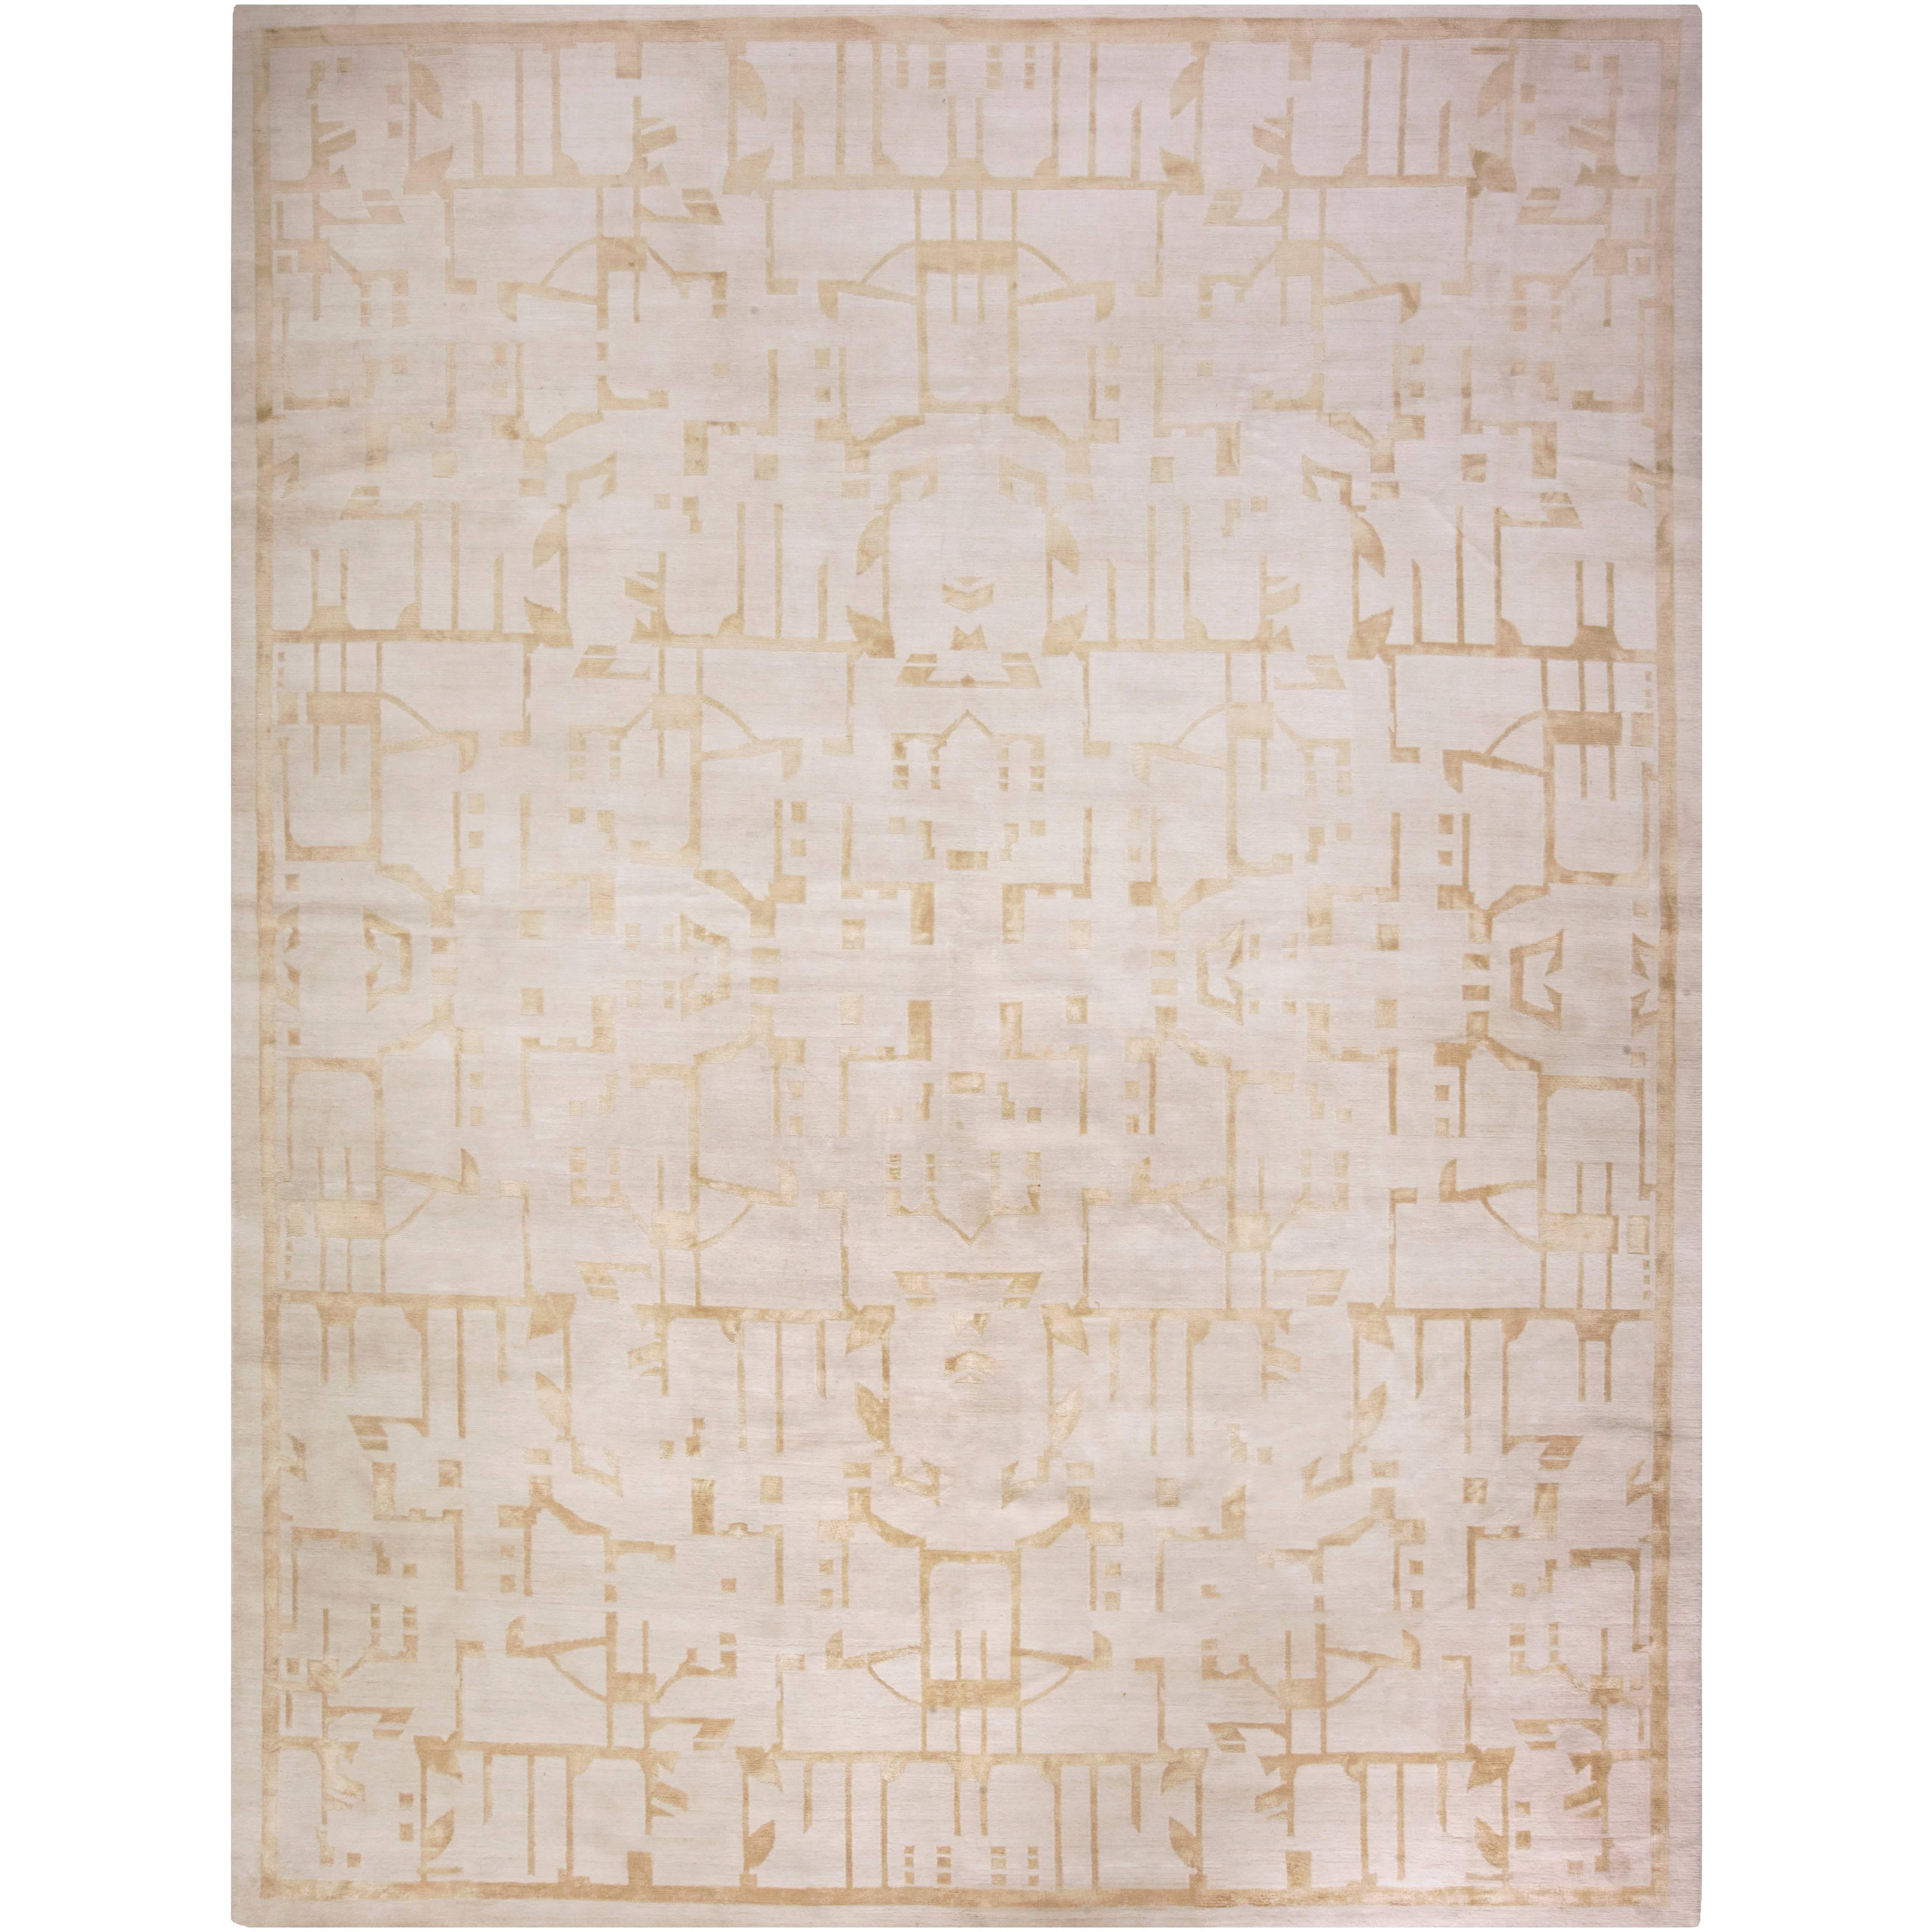 21st Century Au Courant Handmade Wool and Silk Rug in Beige and Gold